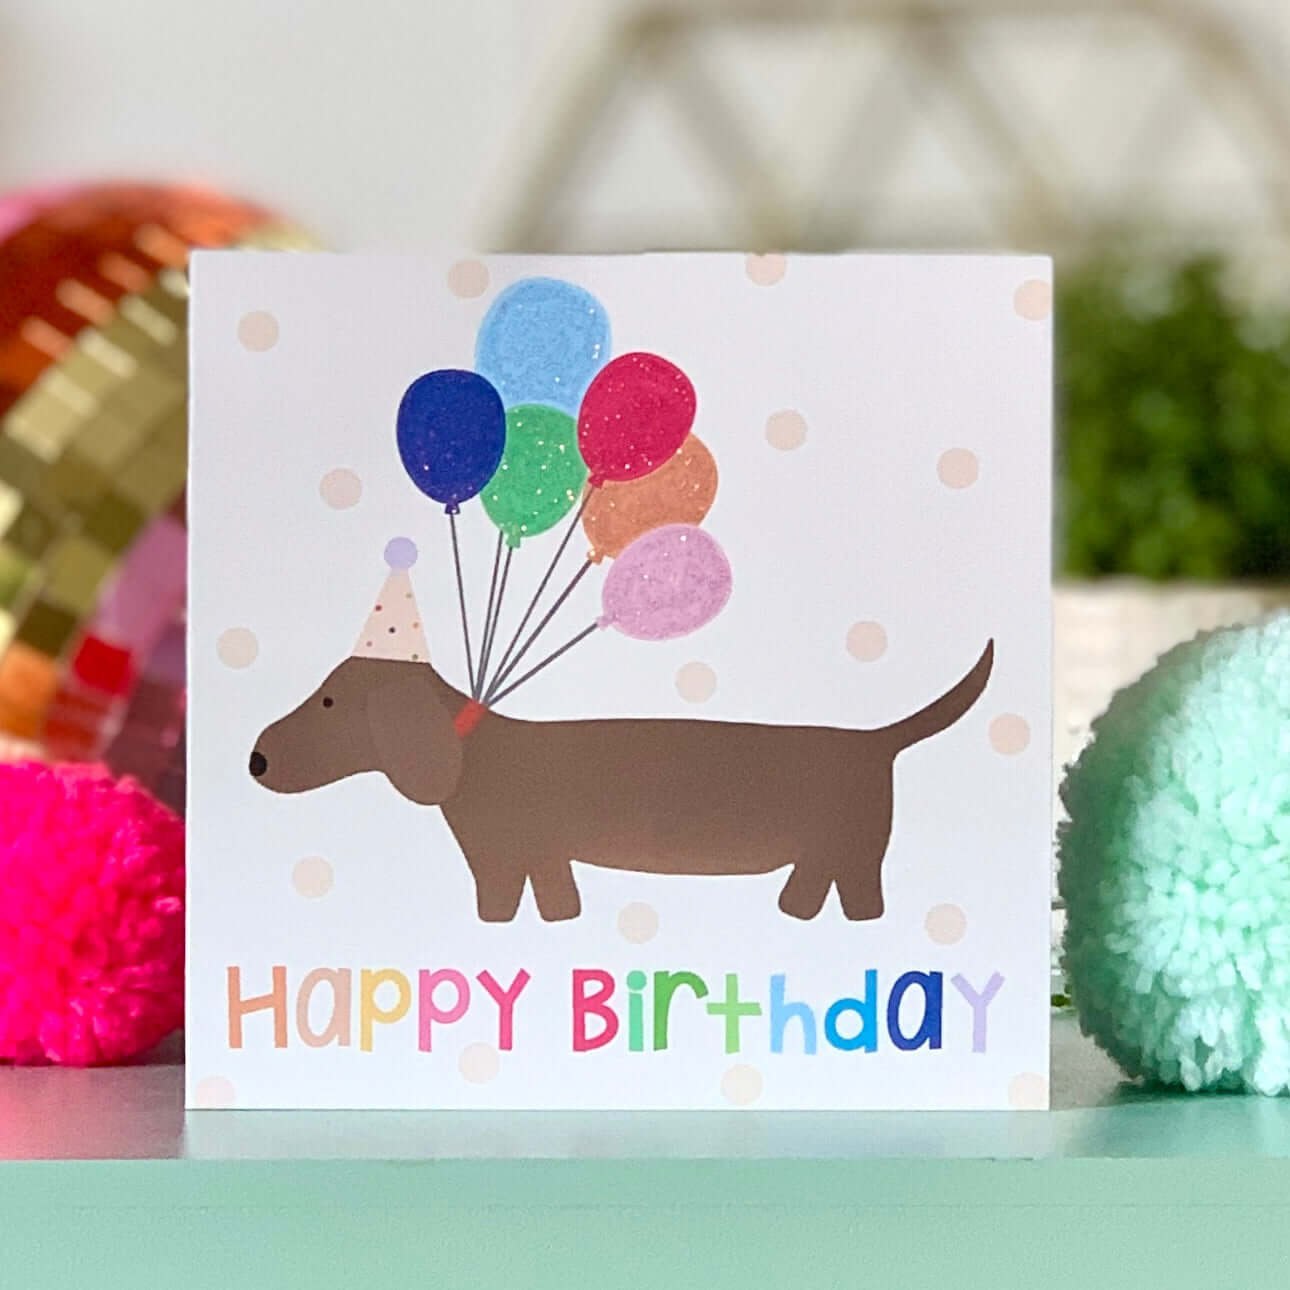 The Ultimate Birthday Party Card Pack